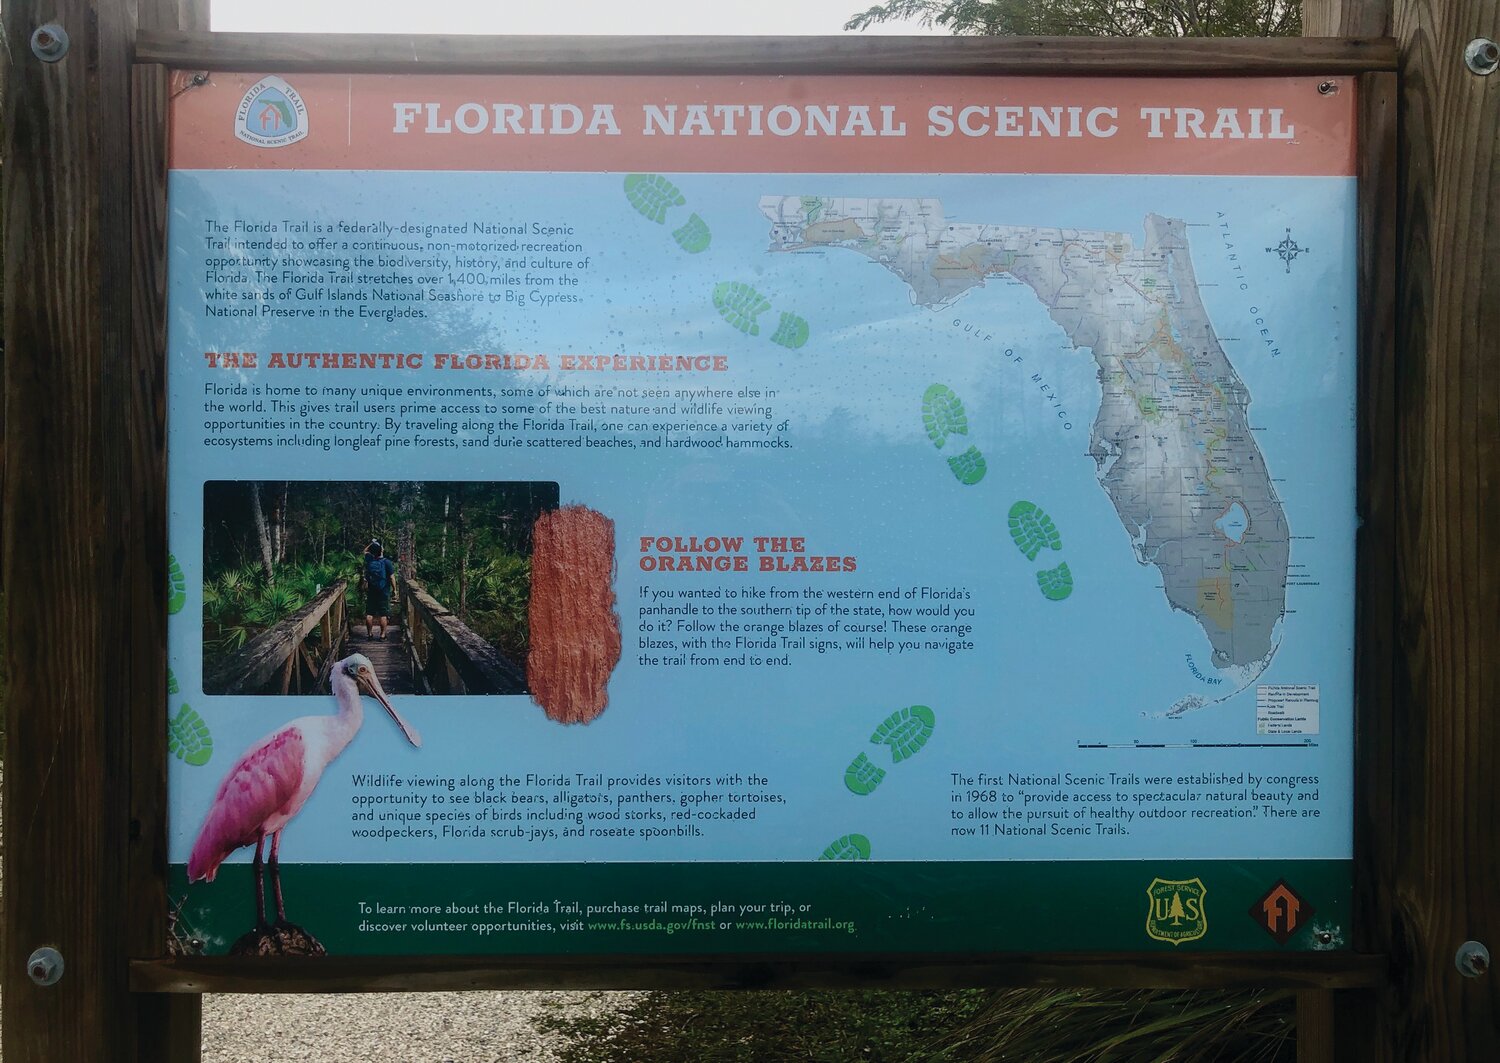 The kiosk at the Florida Trail Southern Terminus